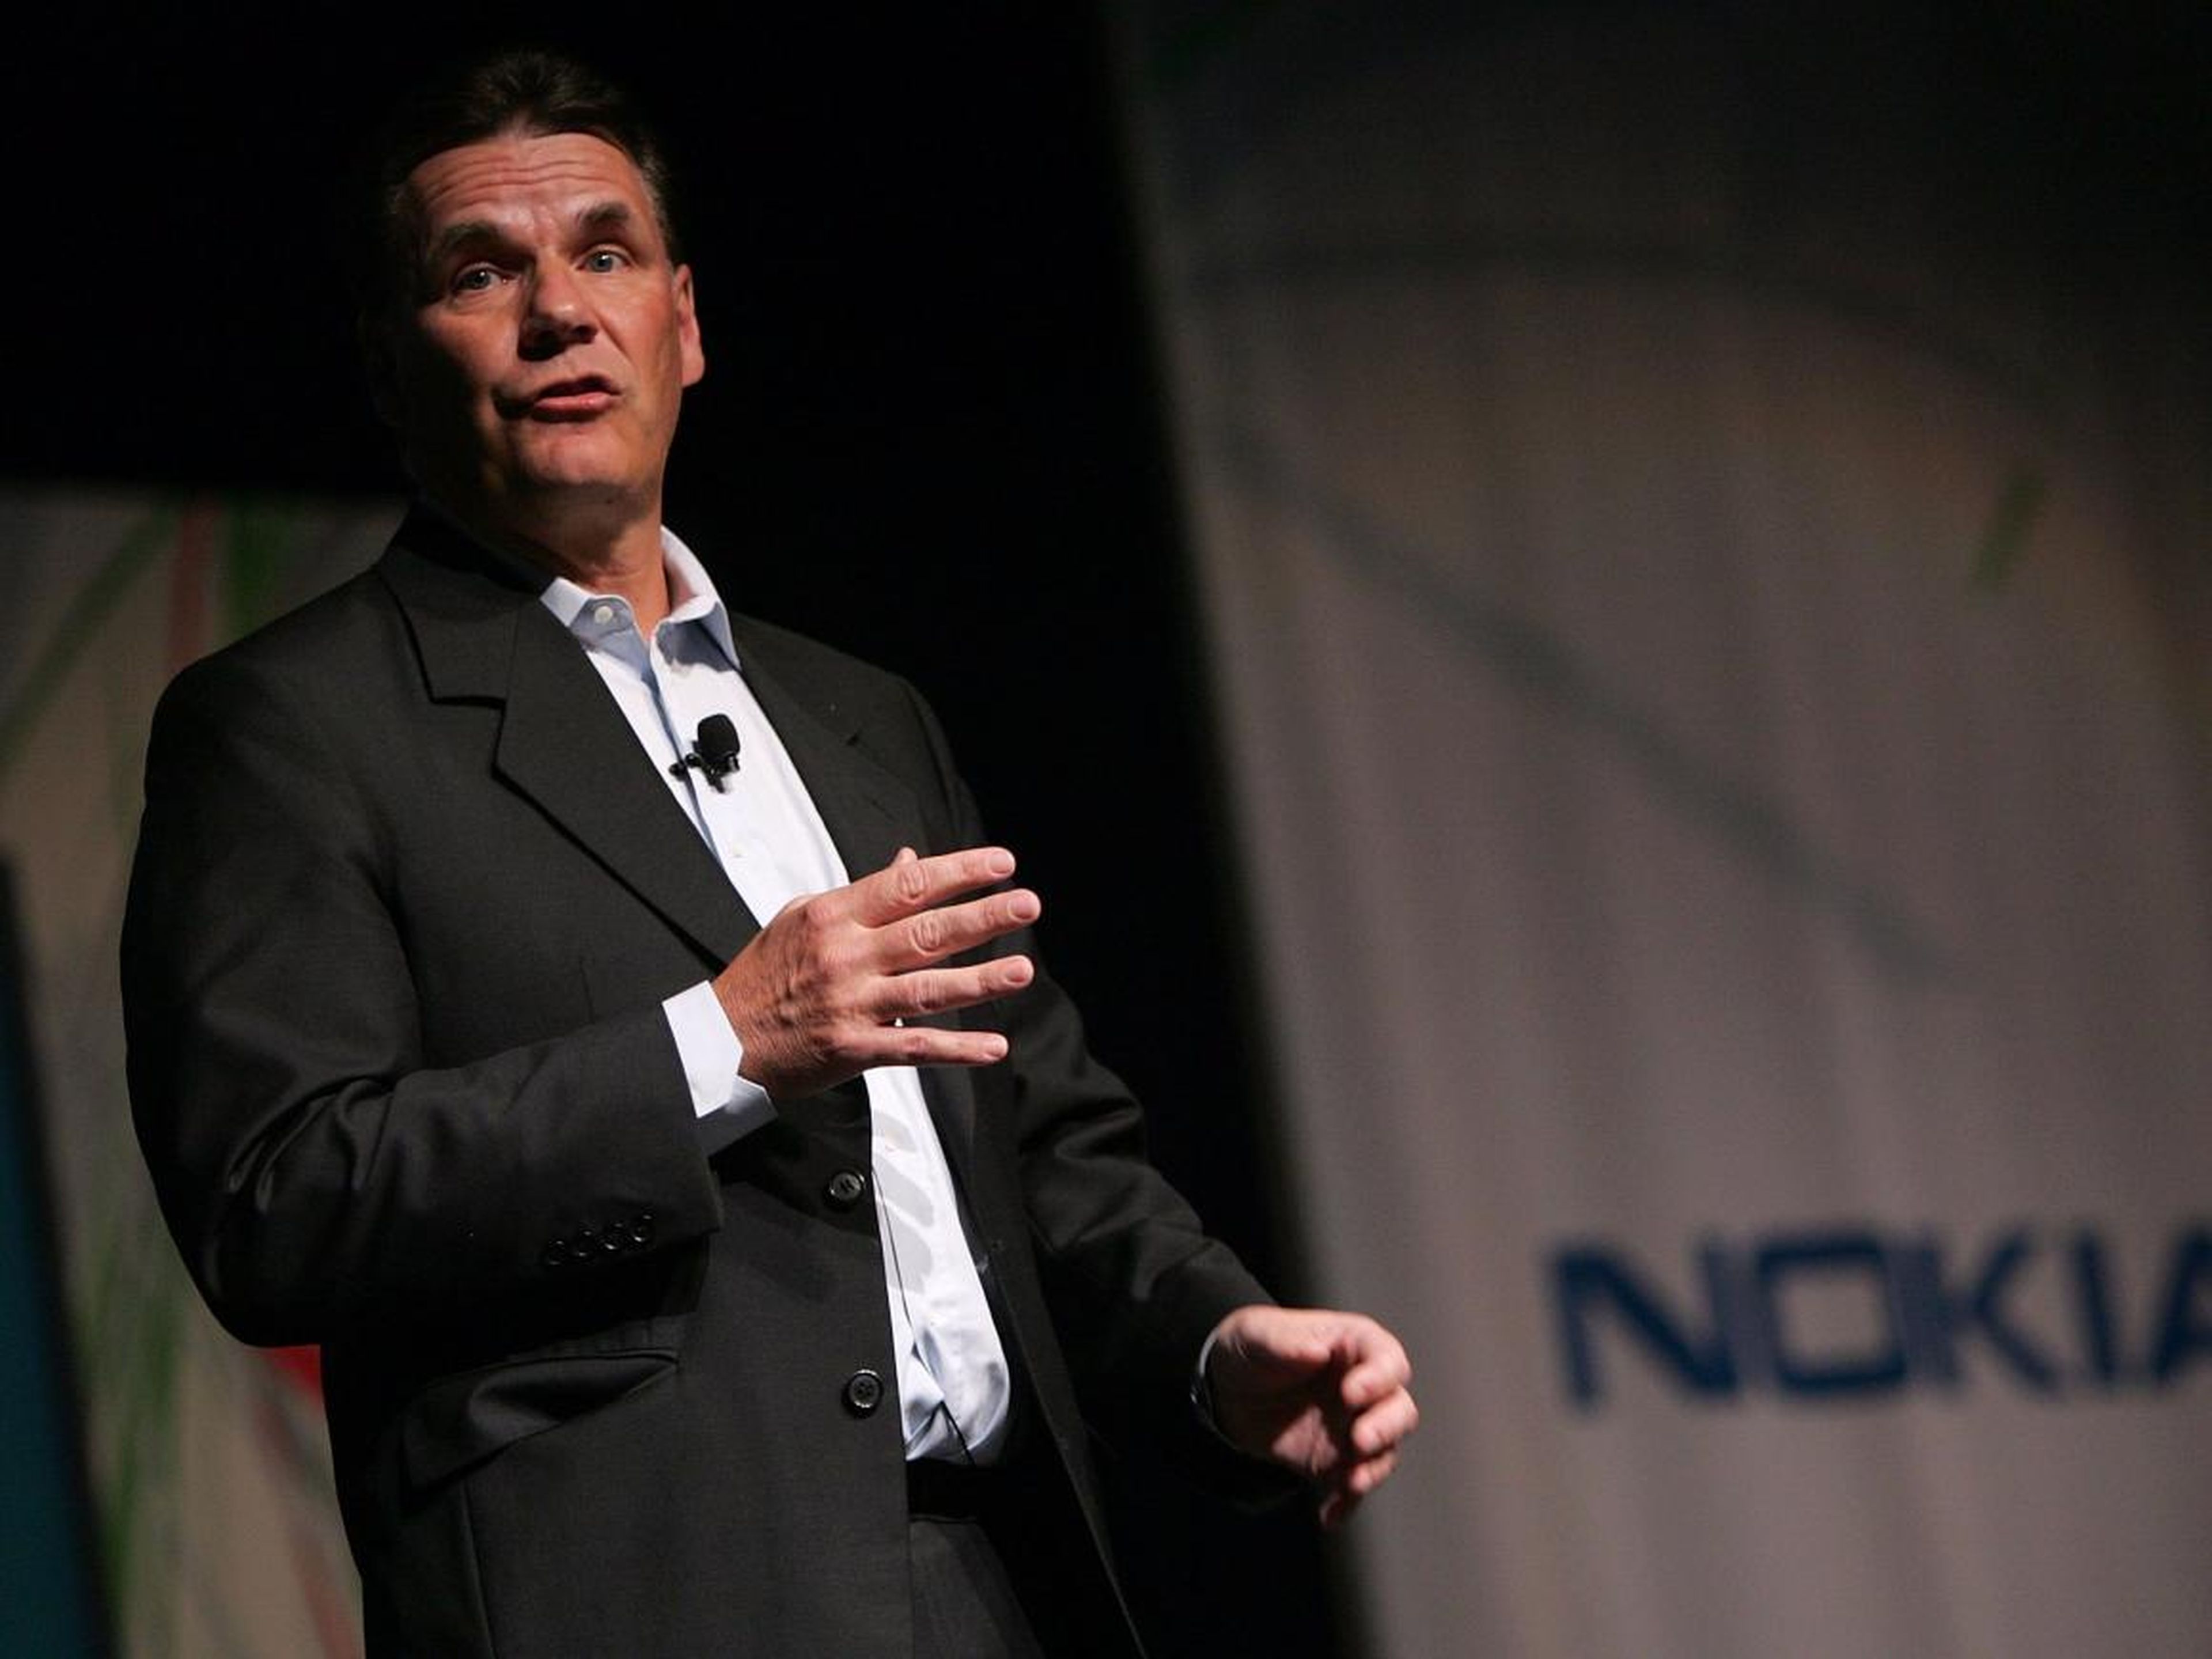 Nokia's CEO then, Olli-Pekka Kallasvuo, didn't take the threat seriously either: "I don't think that what we have seen so far (from Apple) is something that would any way necessitate us changing our thinking when it comes to